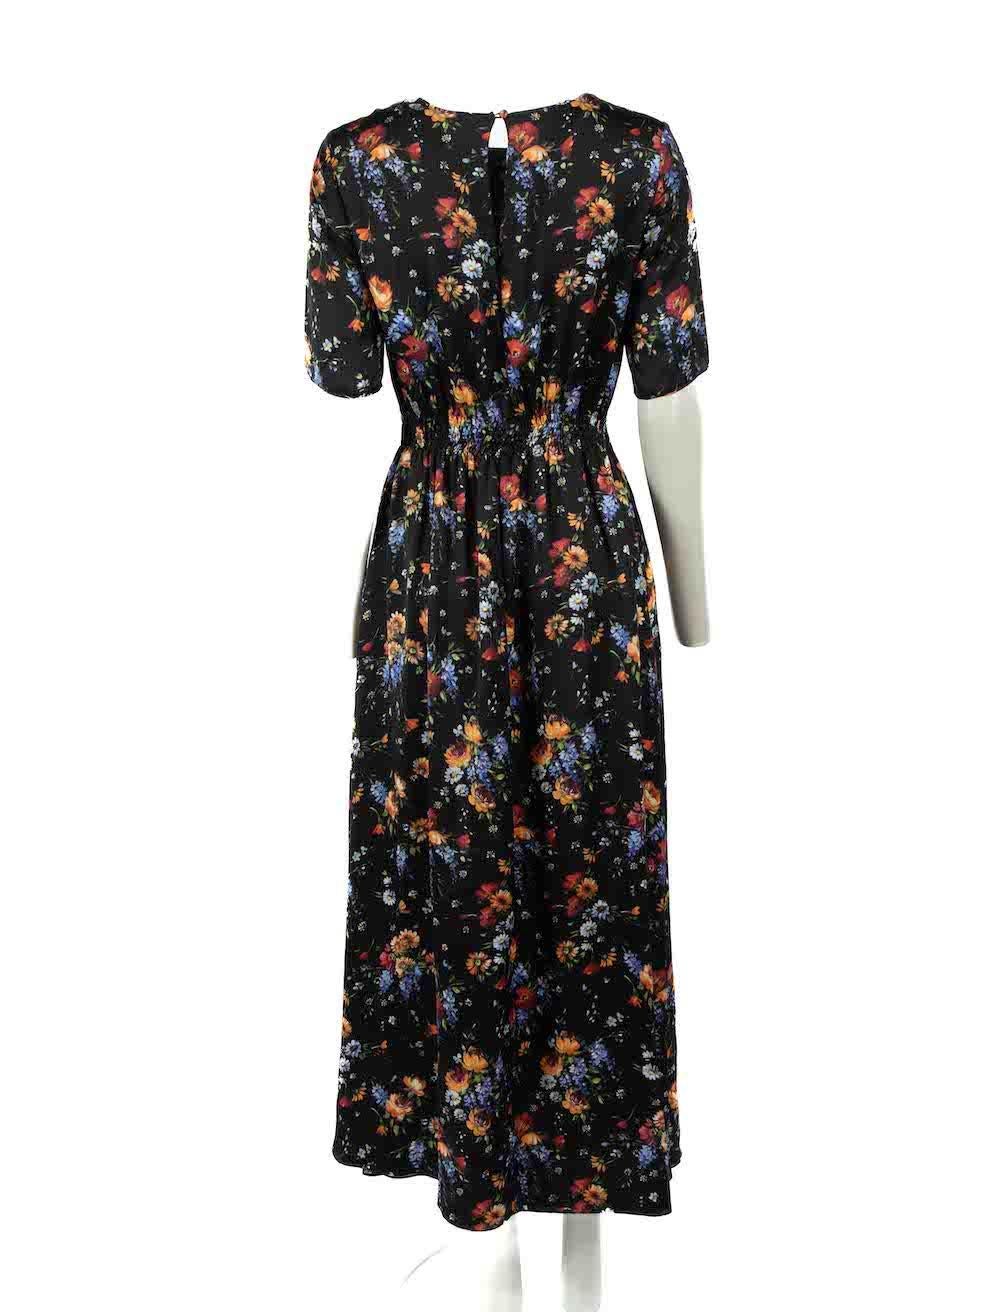 Adam Lippes Black Silk Floral Print Maxi Dress Size XS In Excellent Condition For Sale In London, GB